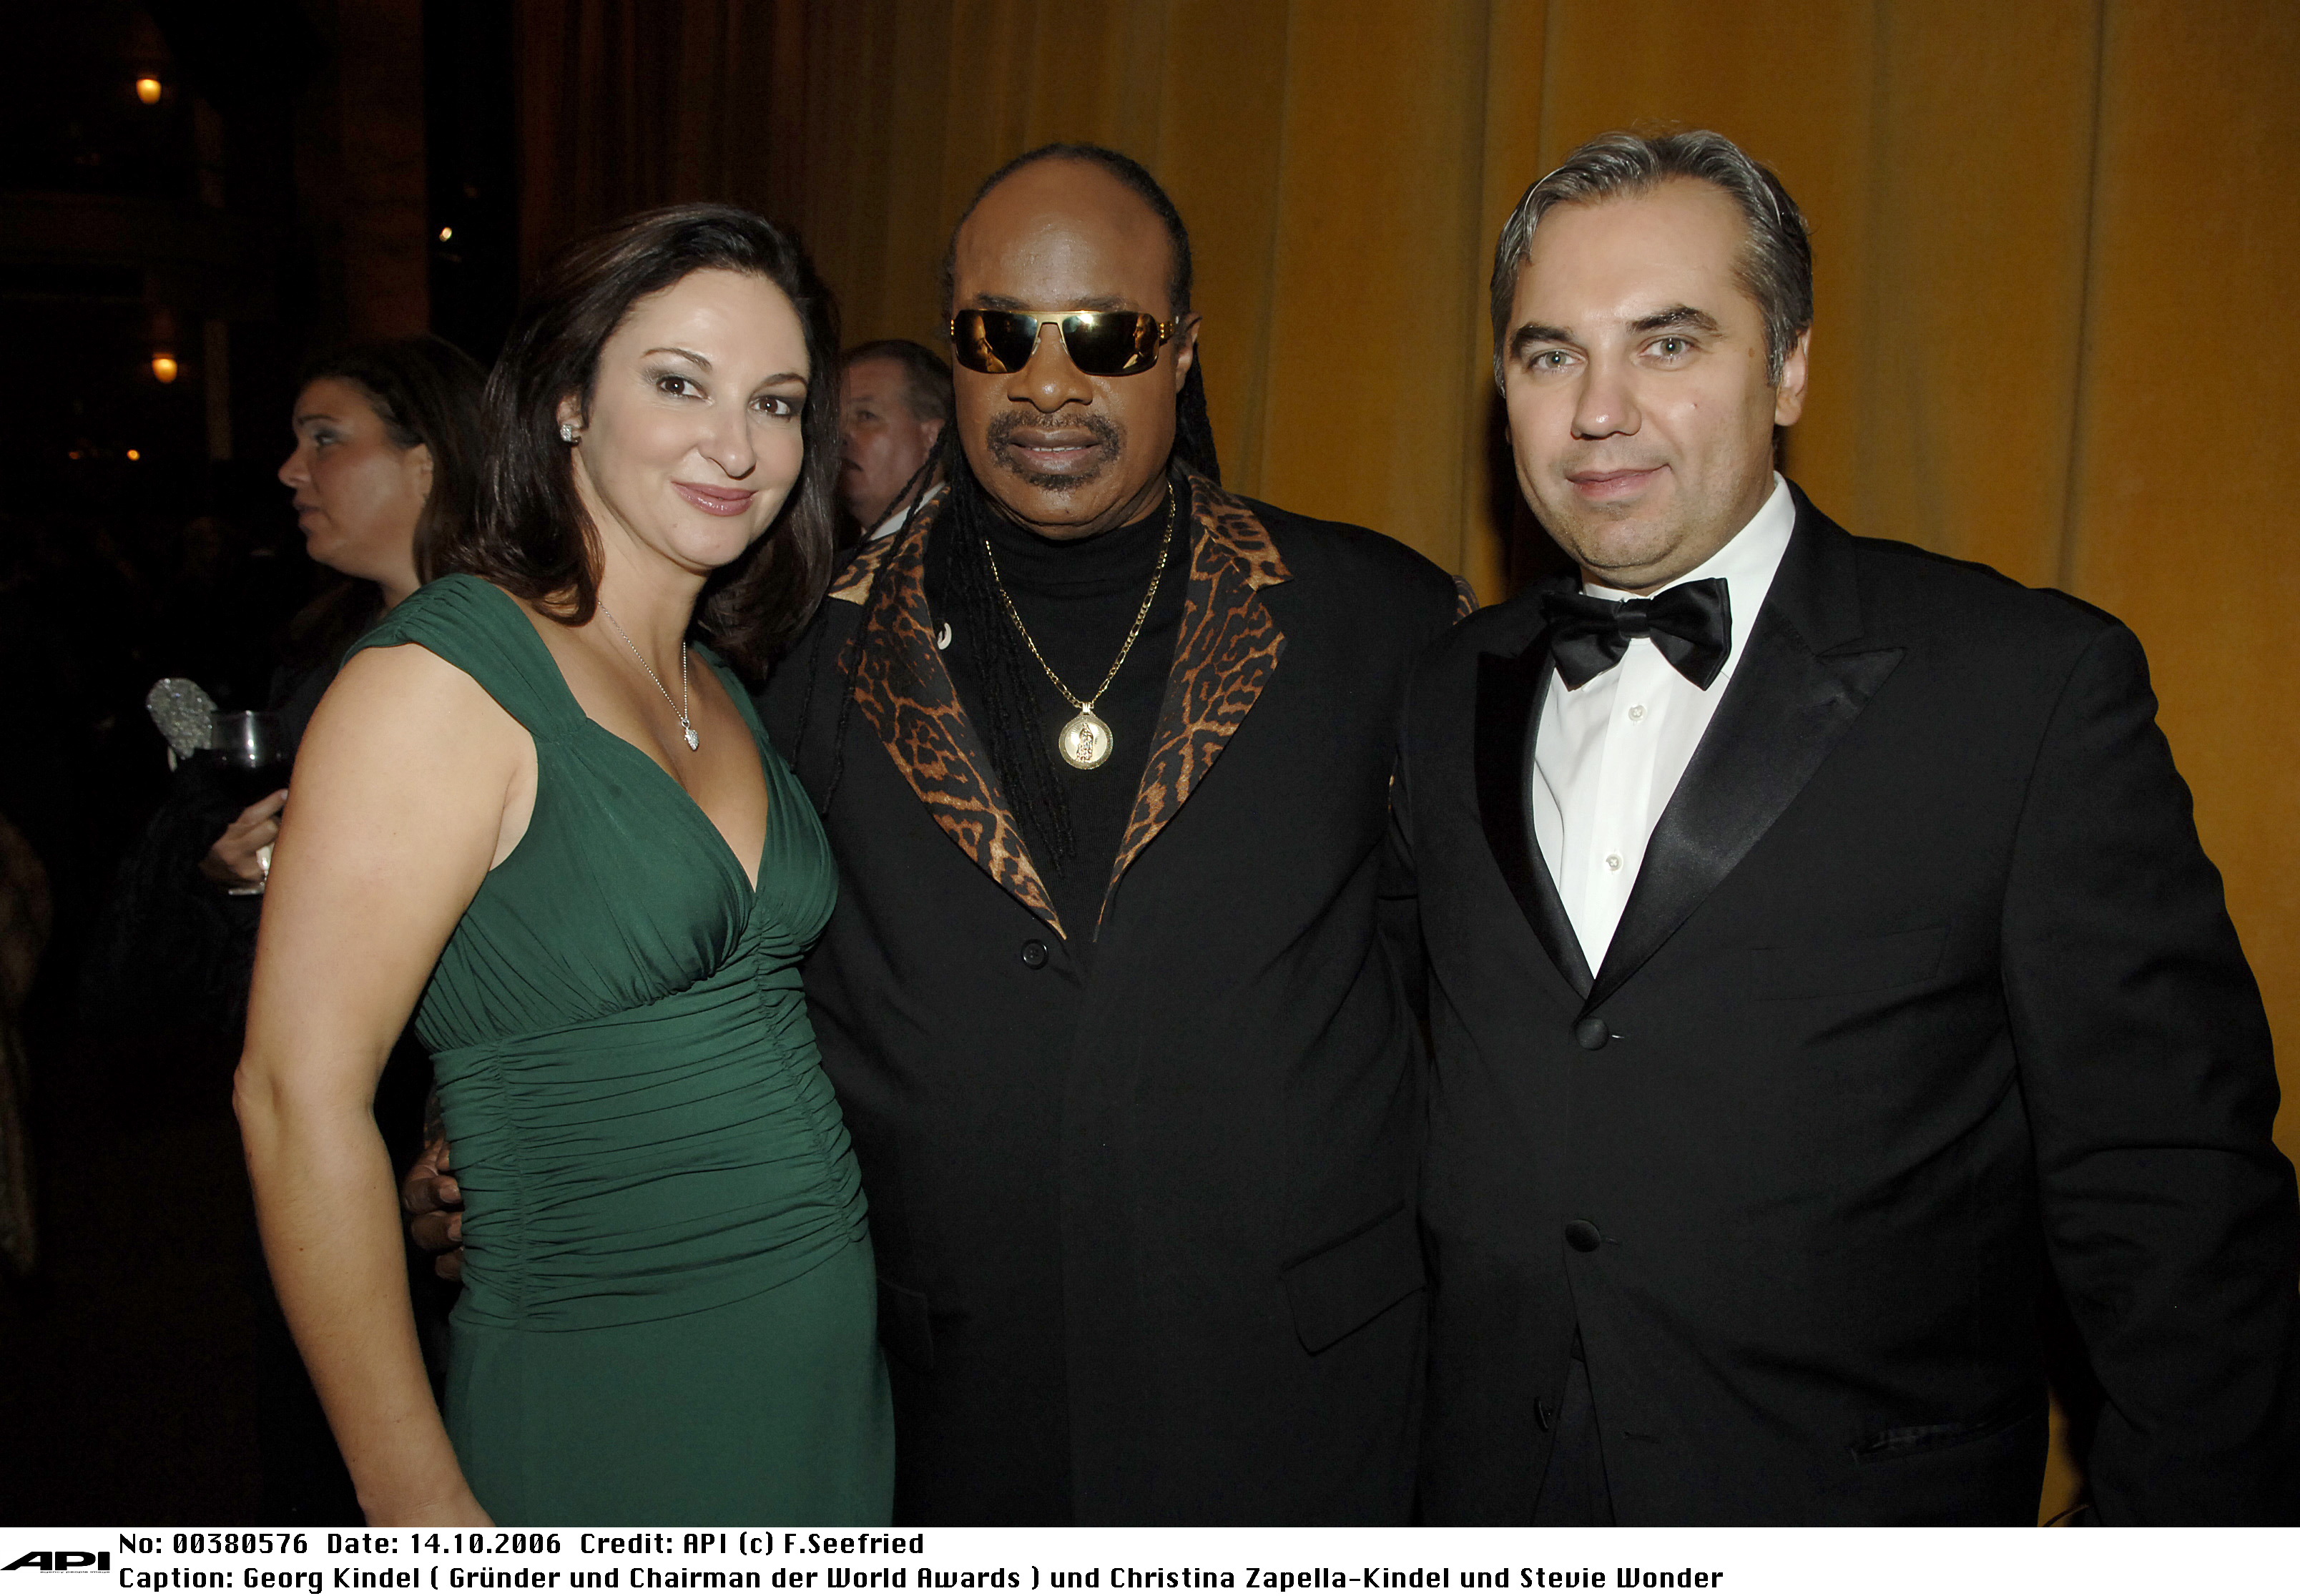 Stevie Wonder with Georg Kindel and his wife Christina at the WOMEN'S WORLD AWARDS in New York City, produced by John Cossette and Georg Kindel